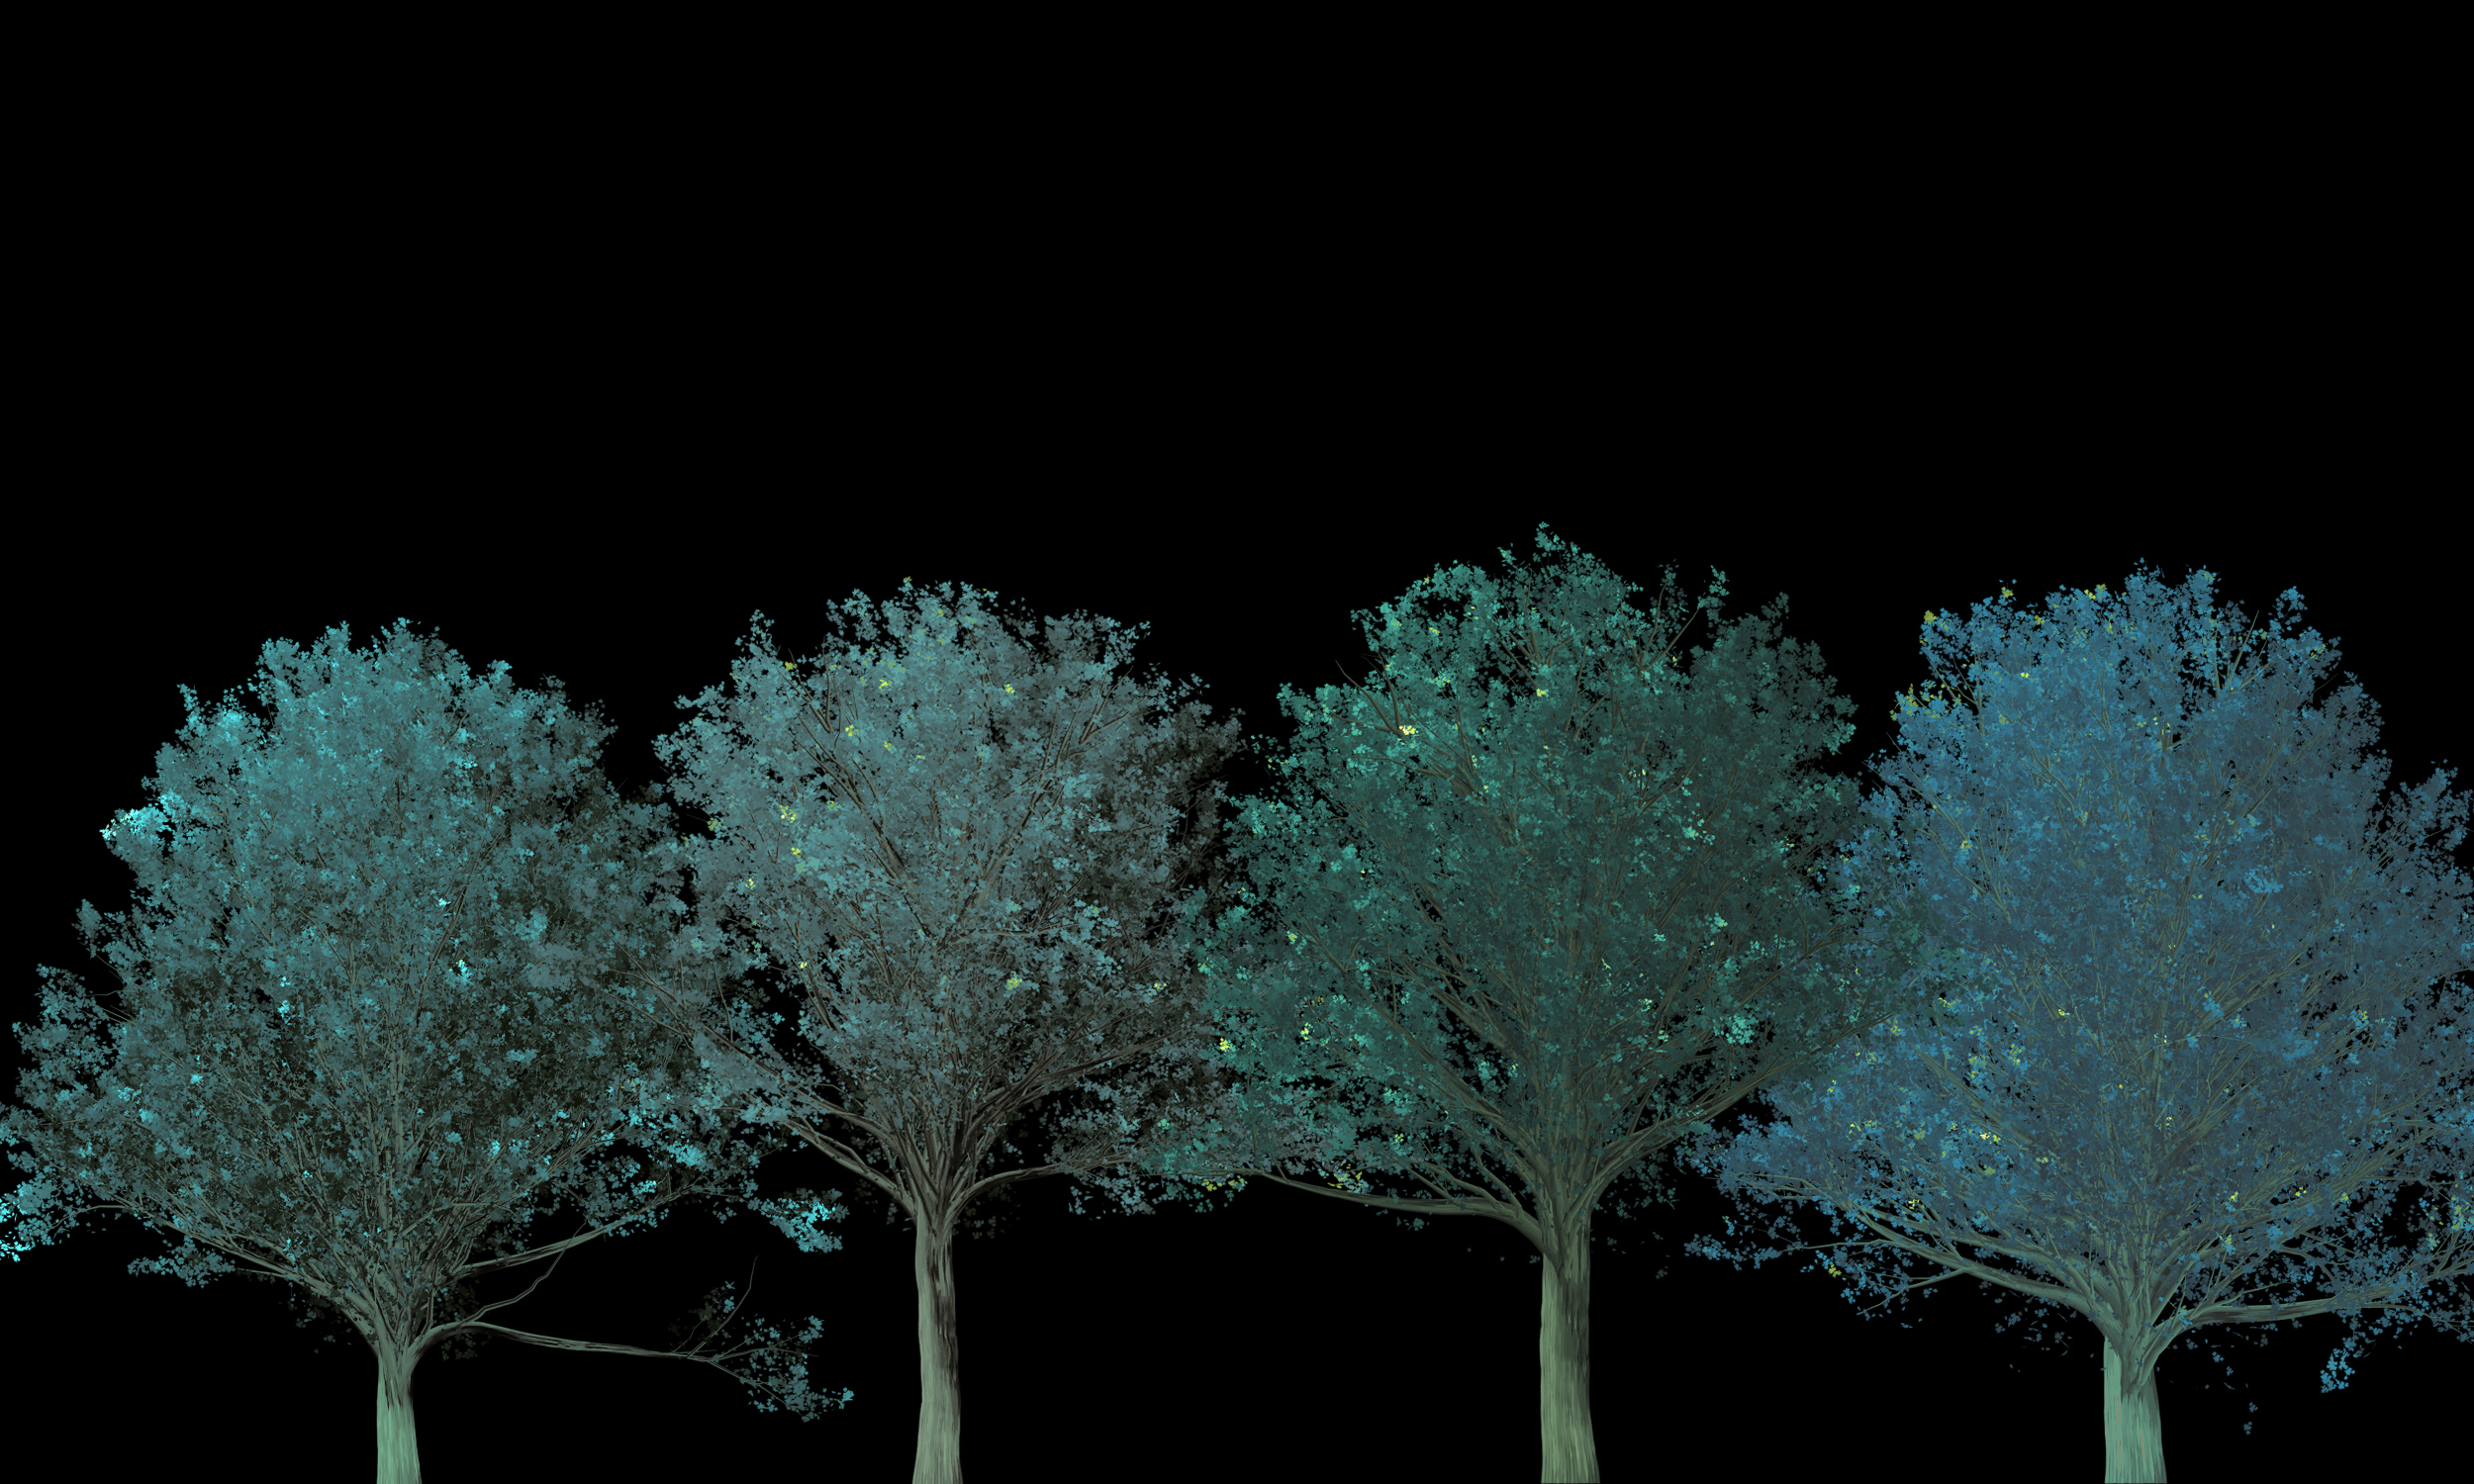 Glow-in-the-dark trees could someday replace city street lights